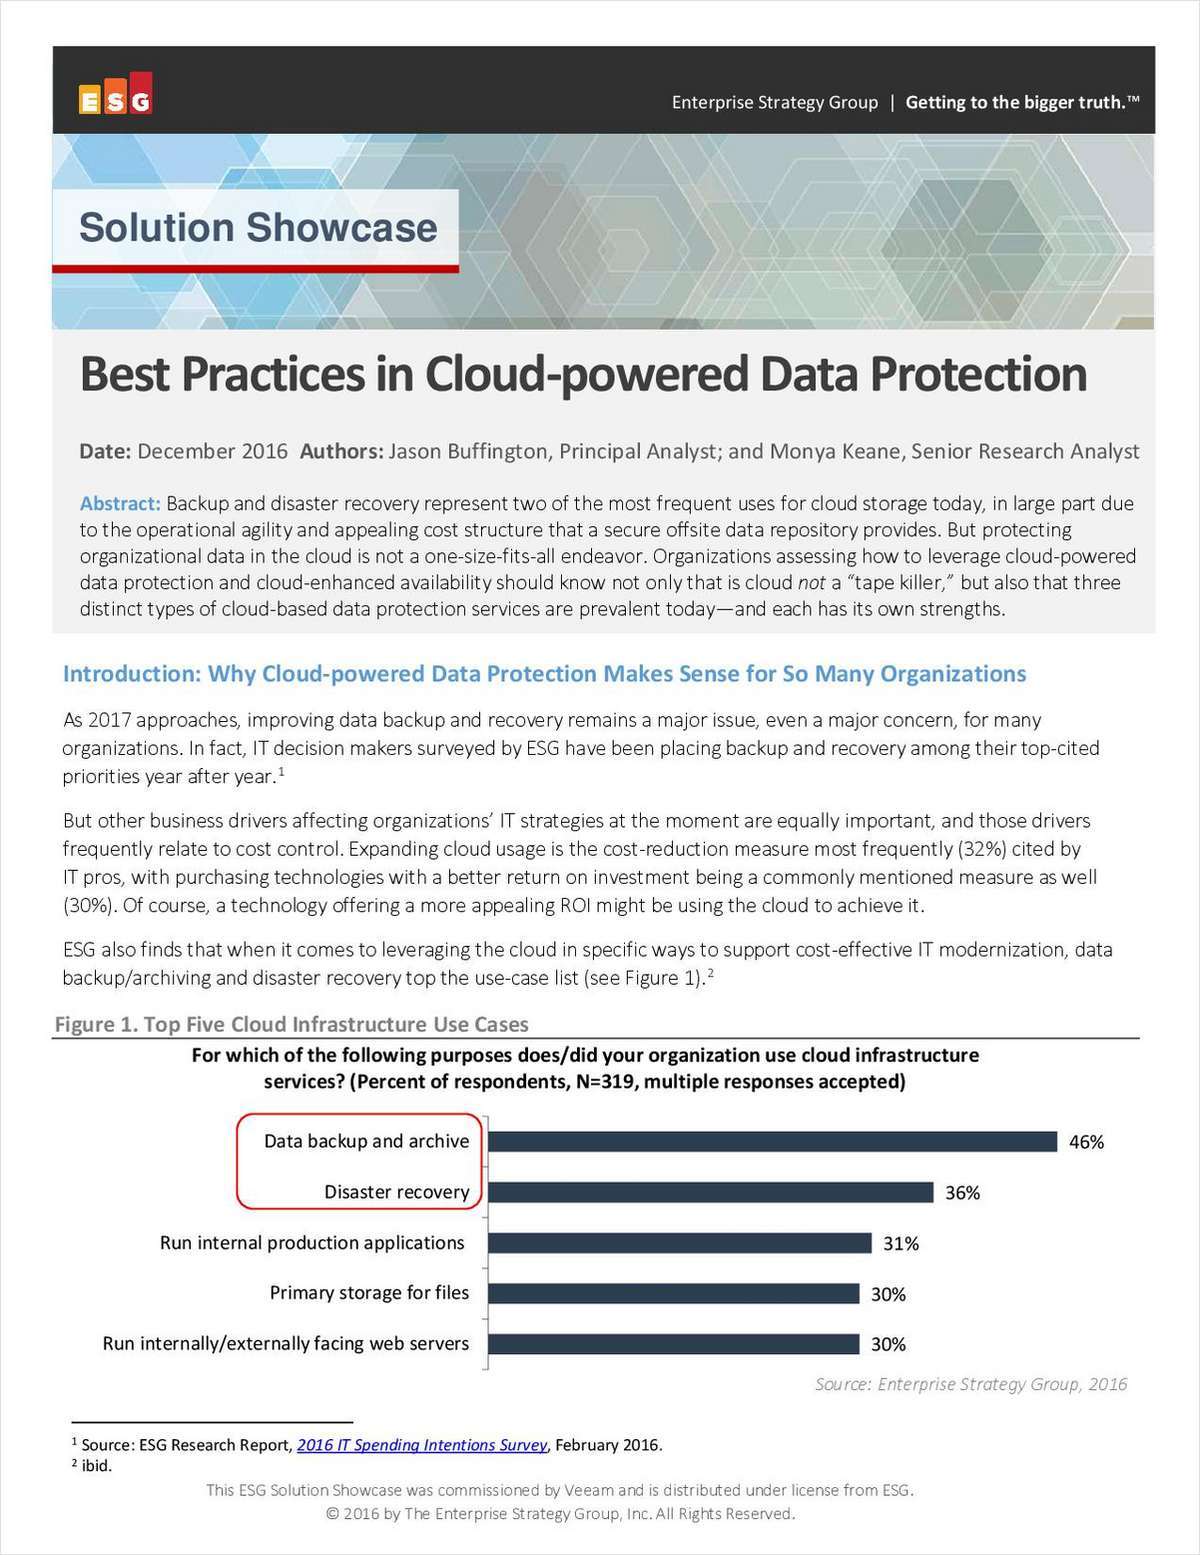 Best Practices in Cloud-powered Data Protection